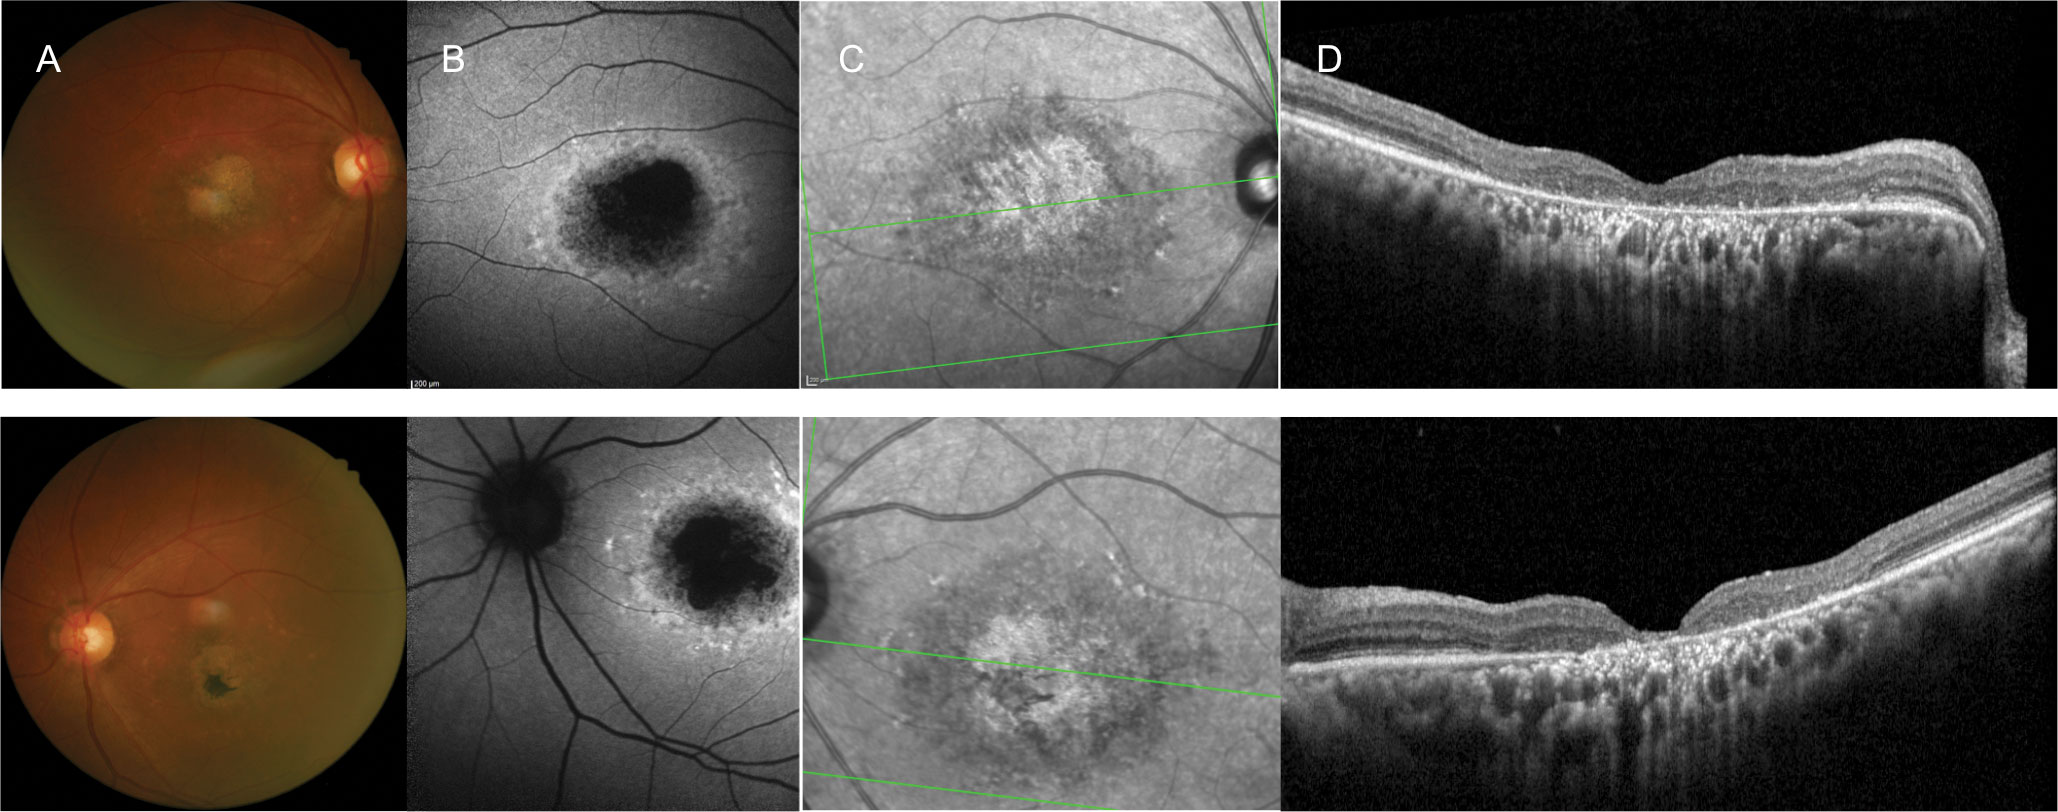 A 60-year-old white female with longstanding vision loss since her late teens and 20/150 best-corrected vision OD and OS. She presented with: (A) macular atrophy and surrounding yellow fleck lesions, (B) a bull’s eye-type pattern, (C) infrared reflectance OU on FAF and (D) outer retinal atrophy on OCT OU. One of her three siblings (a brother) had the same ocular condition. The others had normal vision, and there were no other affected family members, including her parents. The patient’s history was consistent with an autosomal recessively inherited condition, and she was clinically diagnosed with Stargardt’s disease. Genetic testing was offered, but she declined.